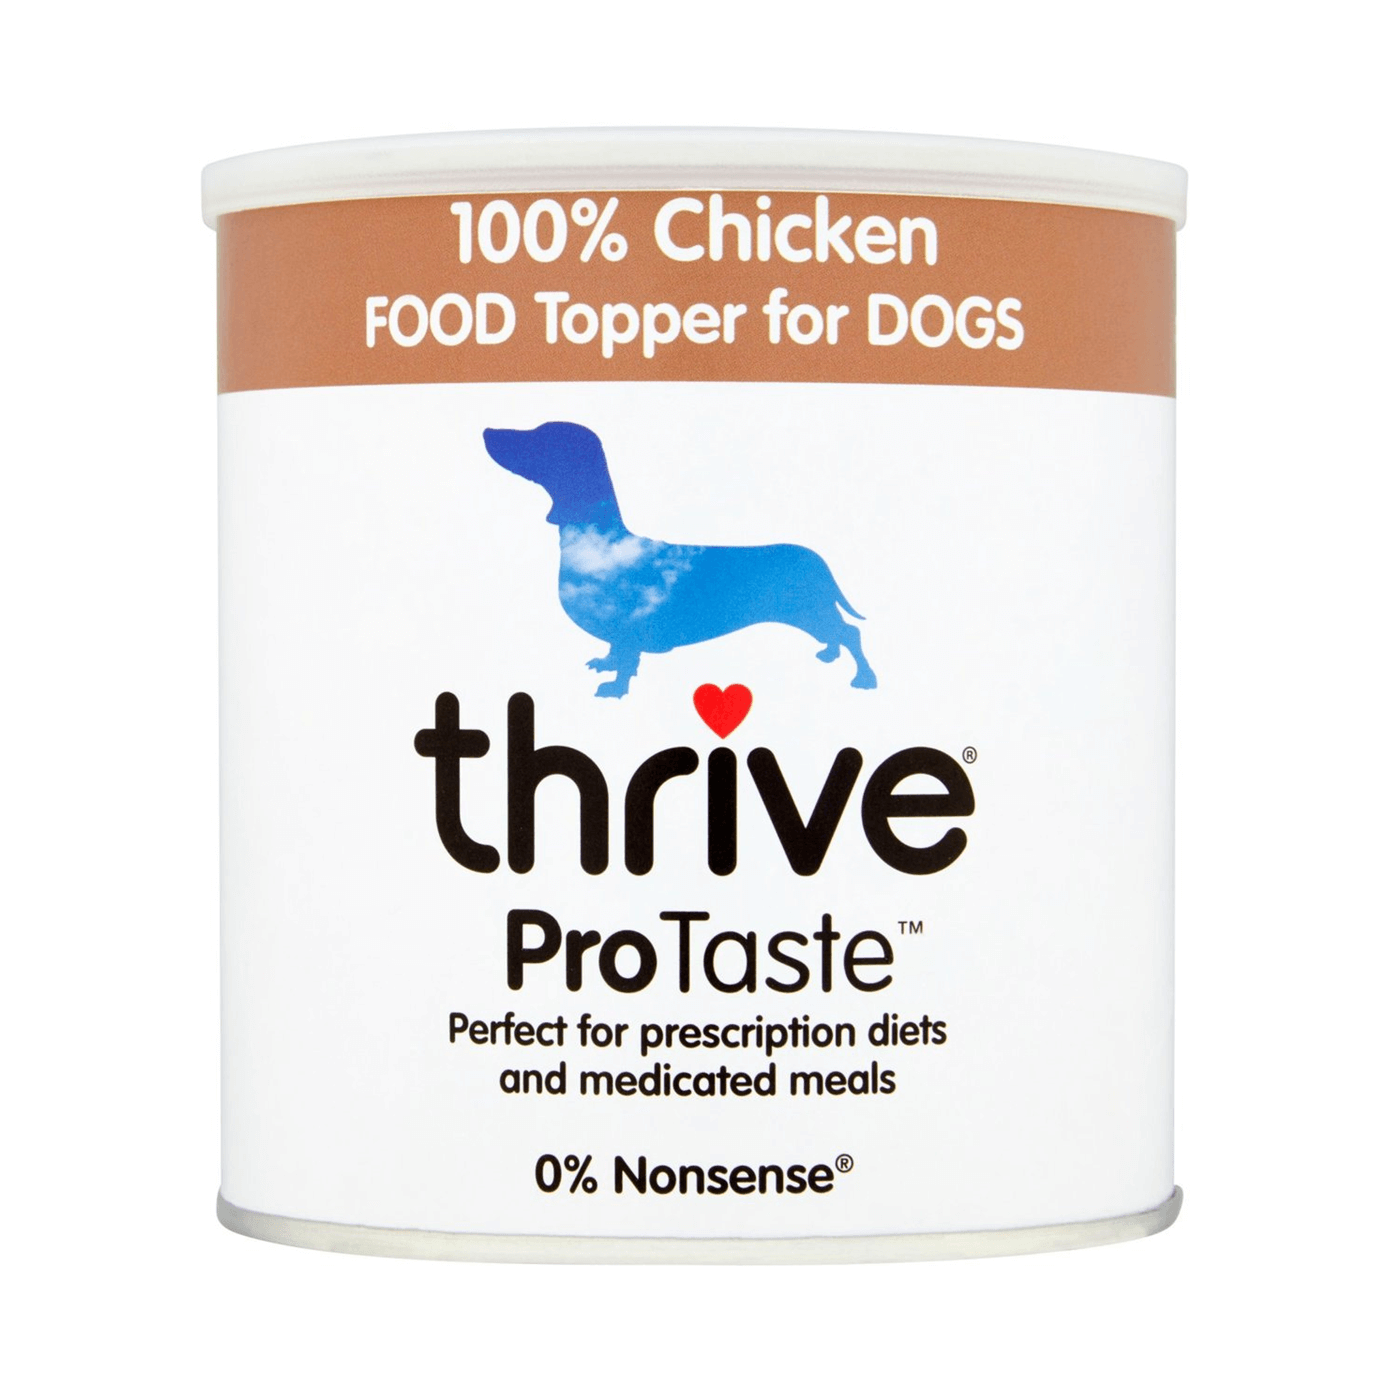 Thrive ProTaste Chicken Food Topper for Dogs 170g